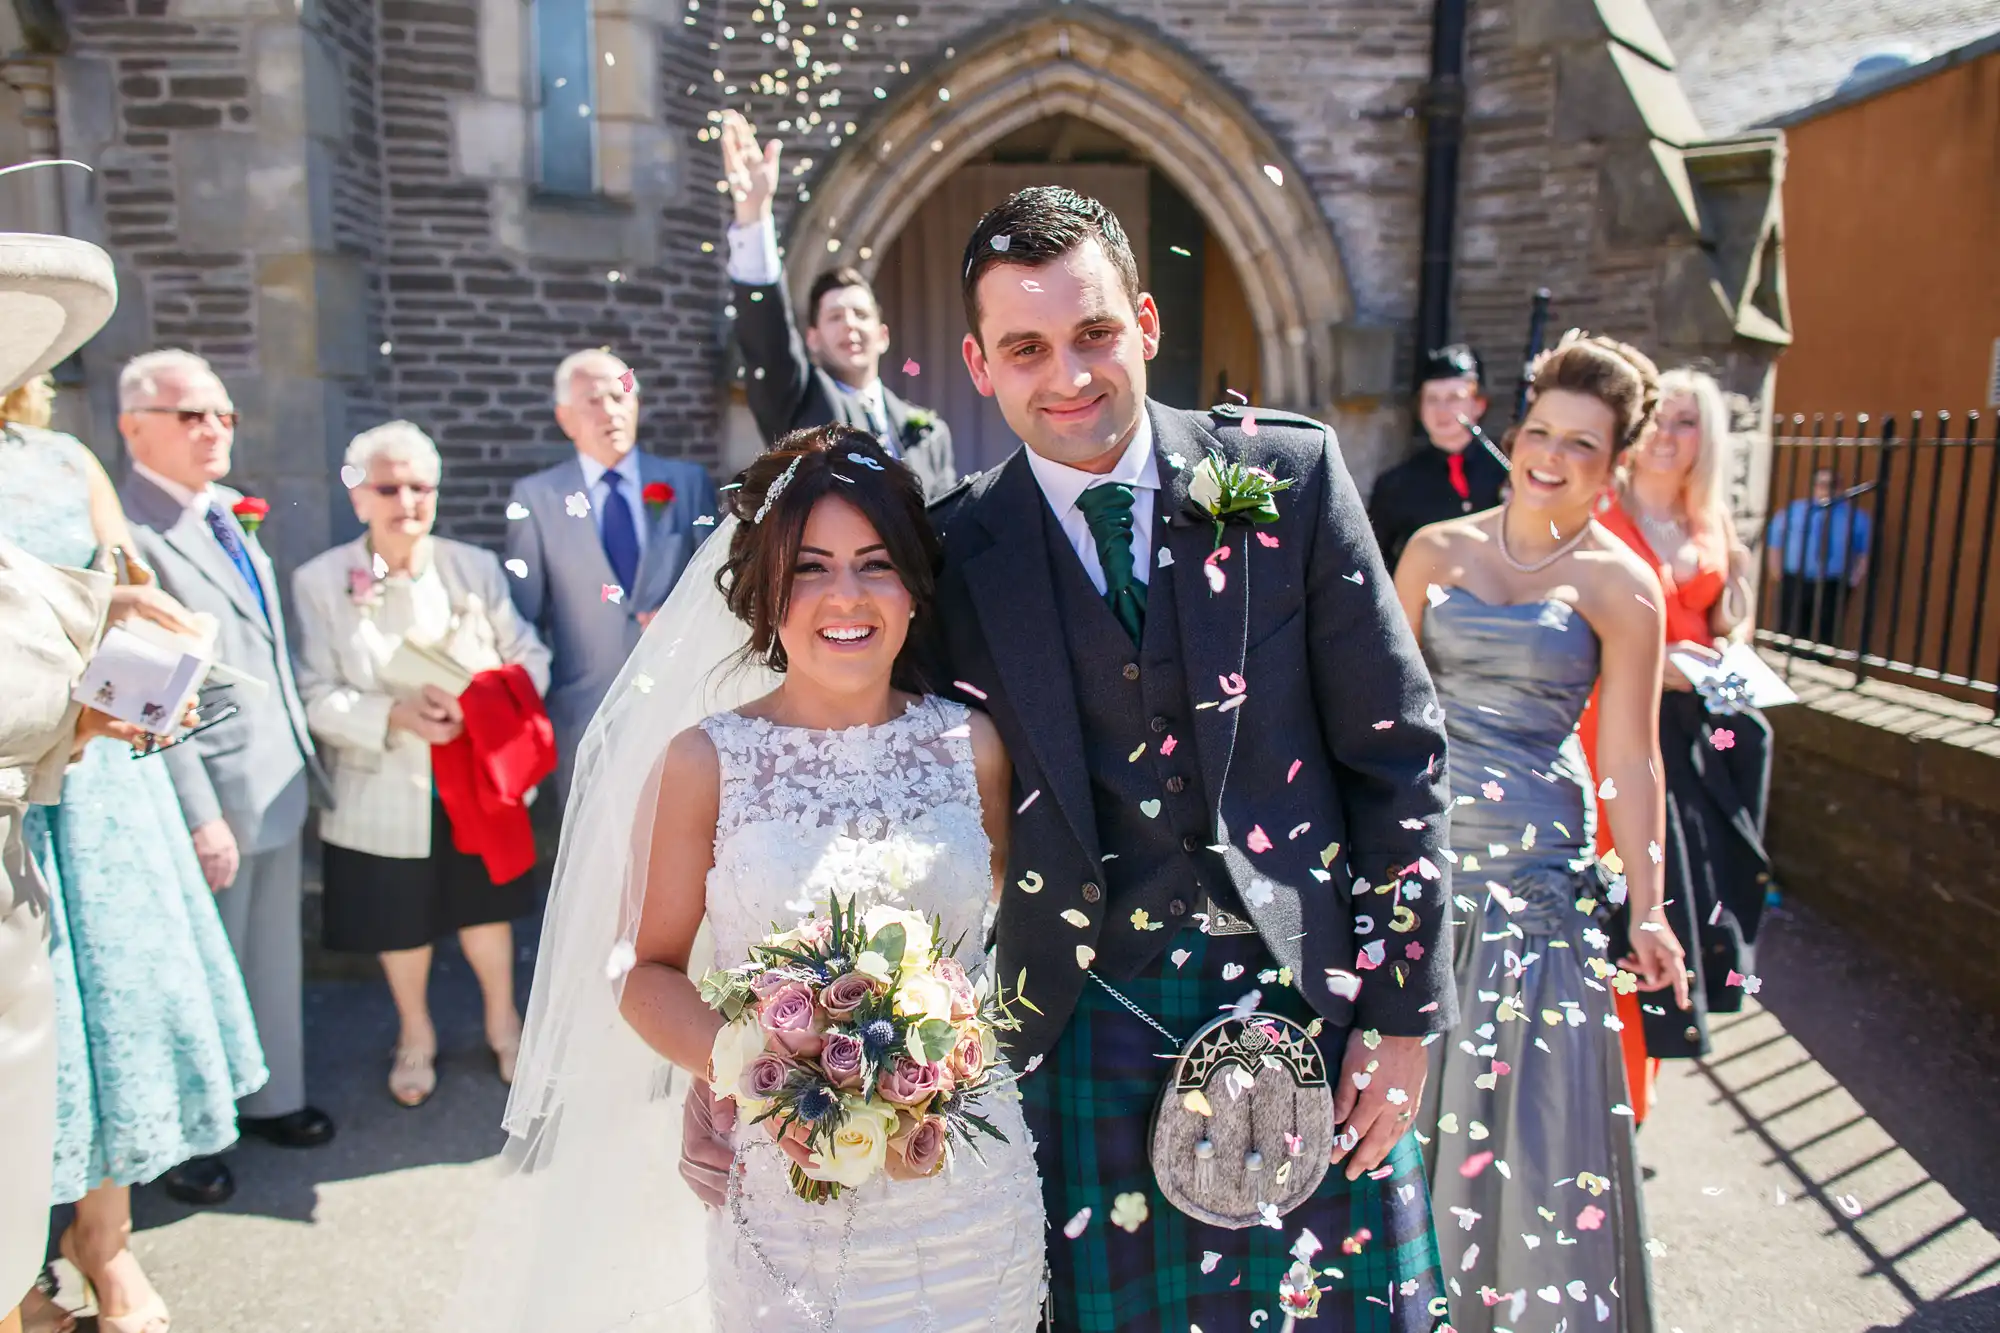 A bride and groom smiling outside a church as guests throw confetti over them on a sunny day.